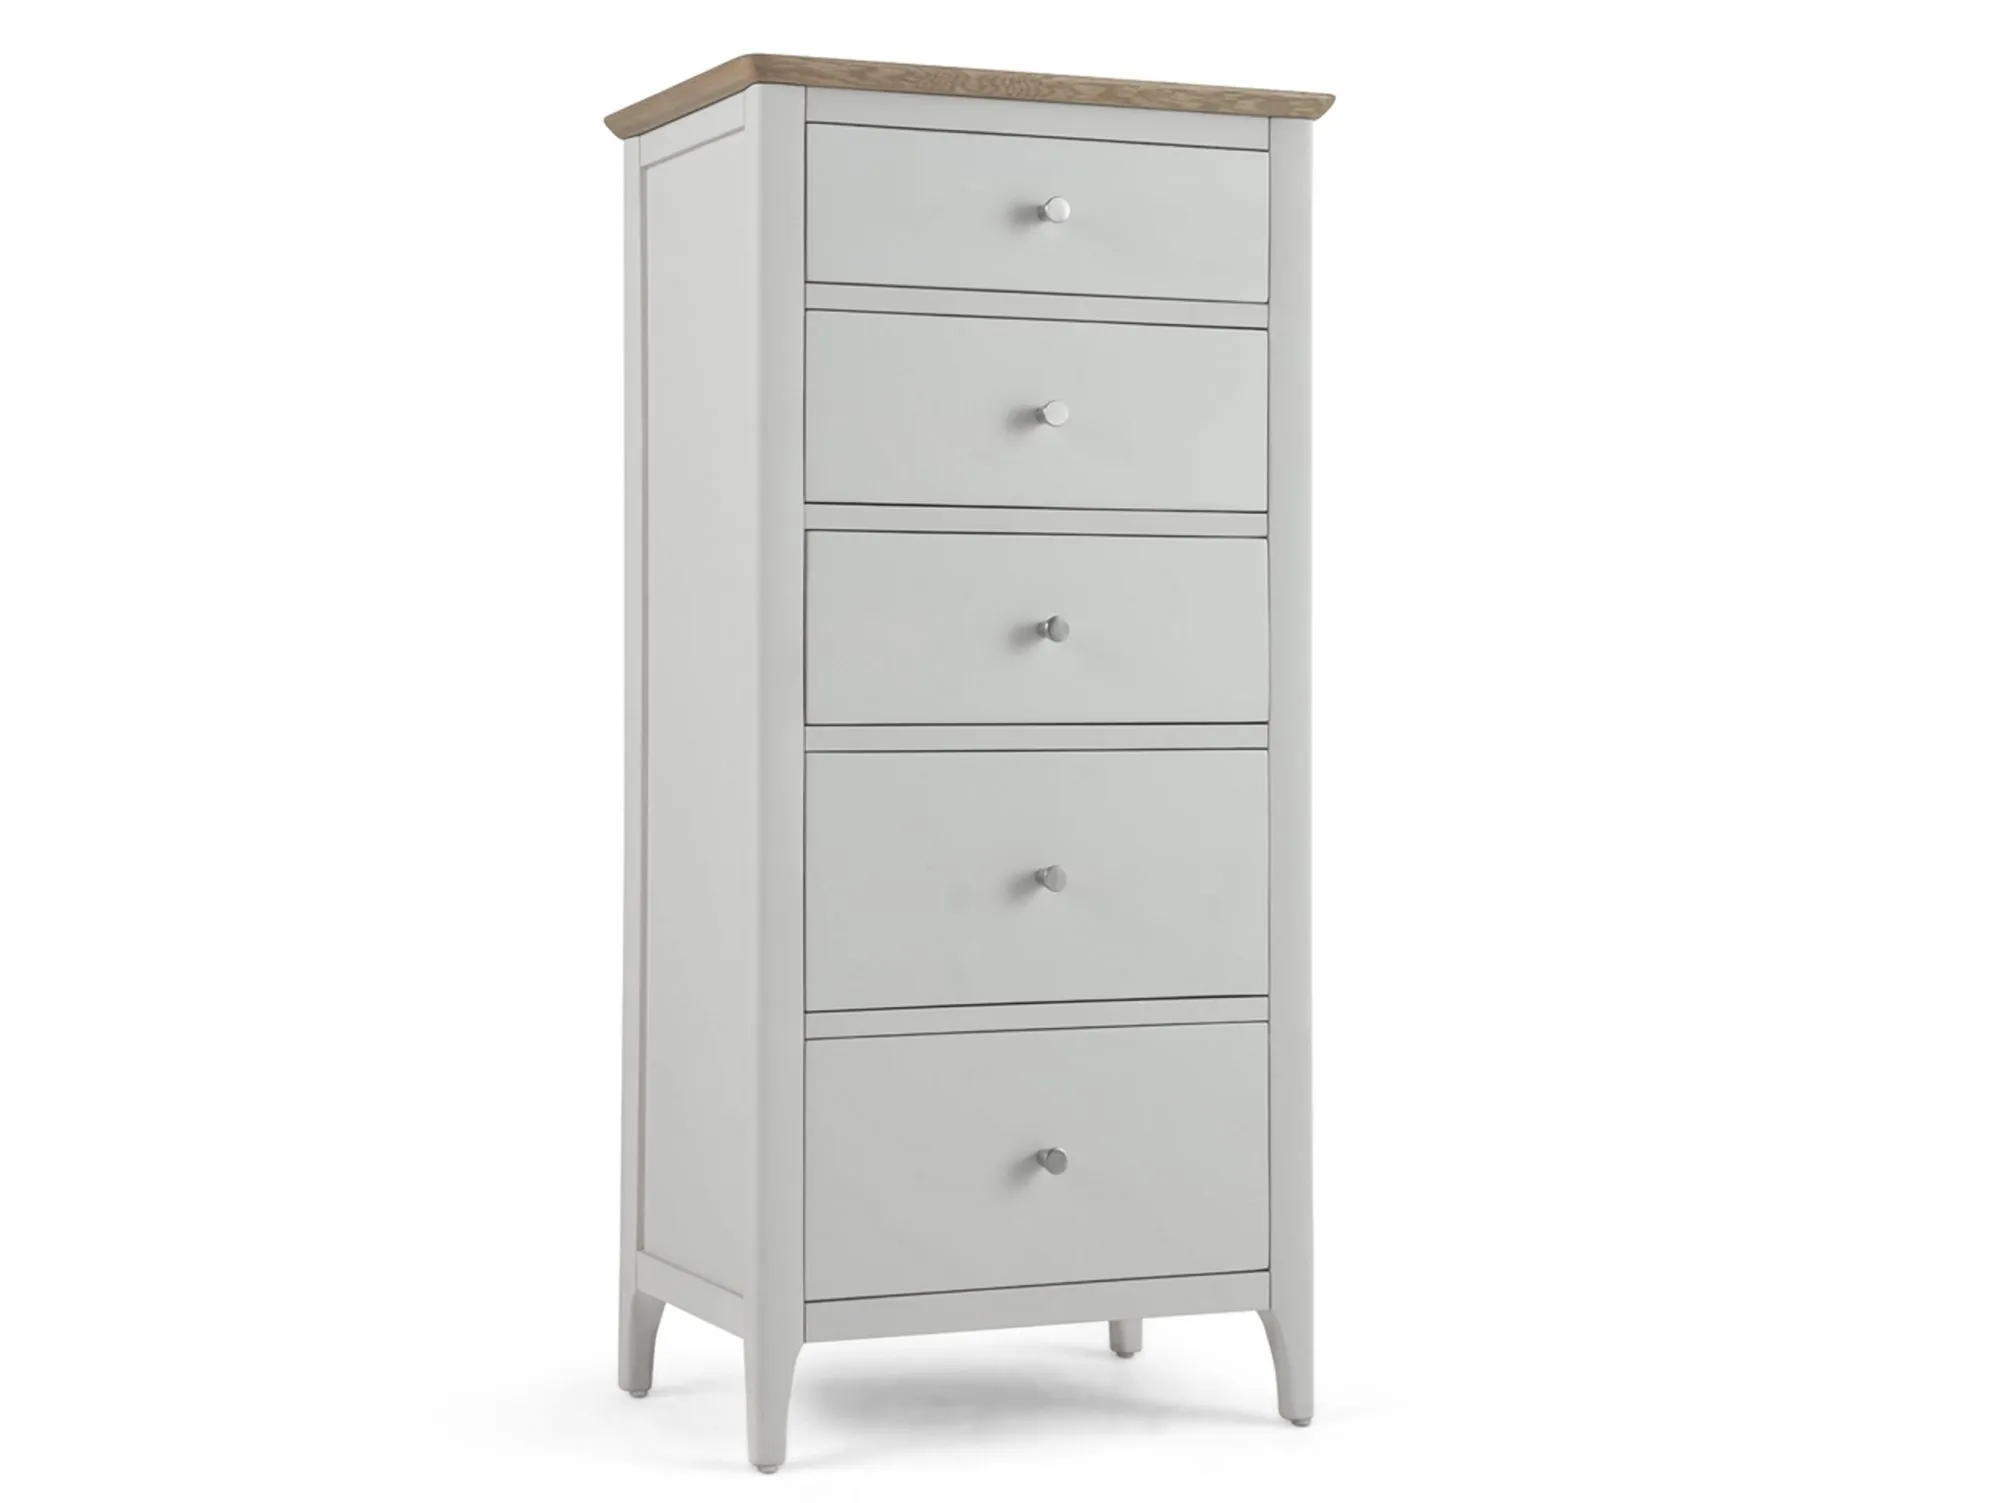 Archers Archers Cotswold Grey and Oak 5 Drawer Tall Chest of Drawers (Assembled)